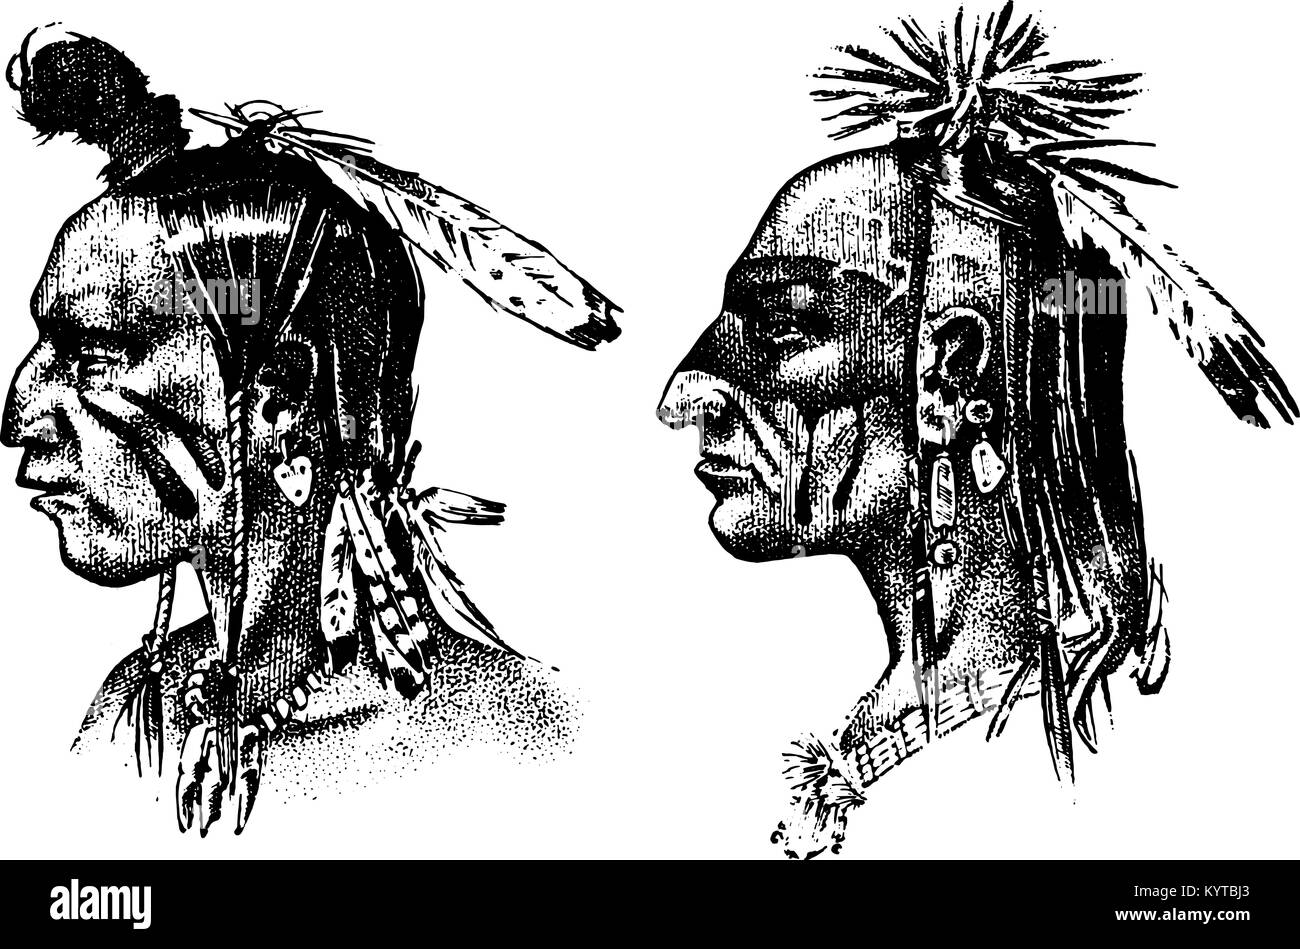 Native American Indian man with headdress and feathers. North or west head mascot of Sioux. traditional culture. half-face, engraved hand drawn realistic in old sketch, vintage style. Stock Vector